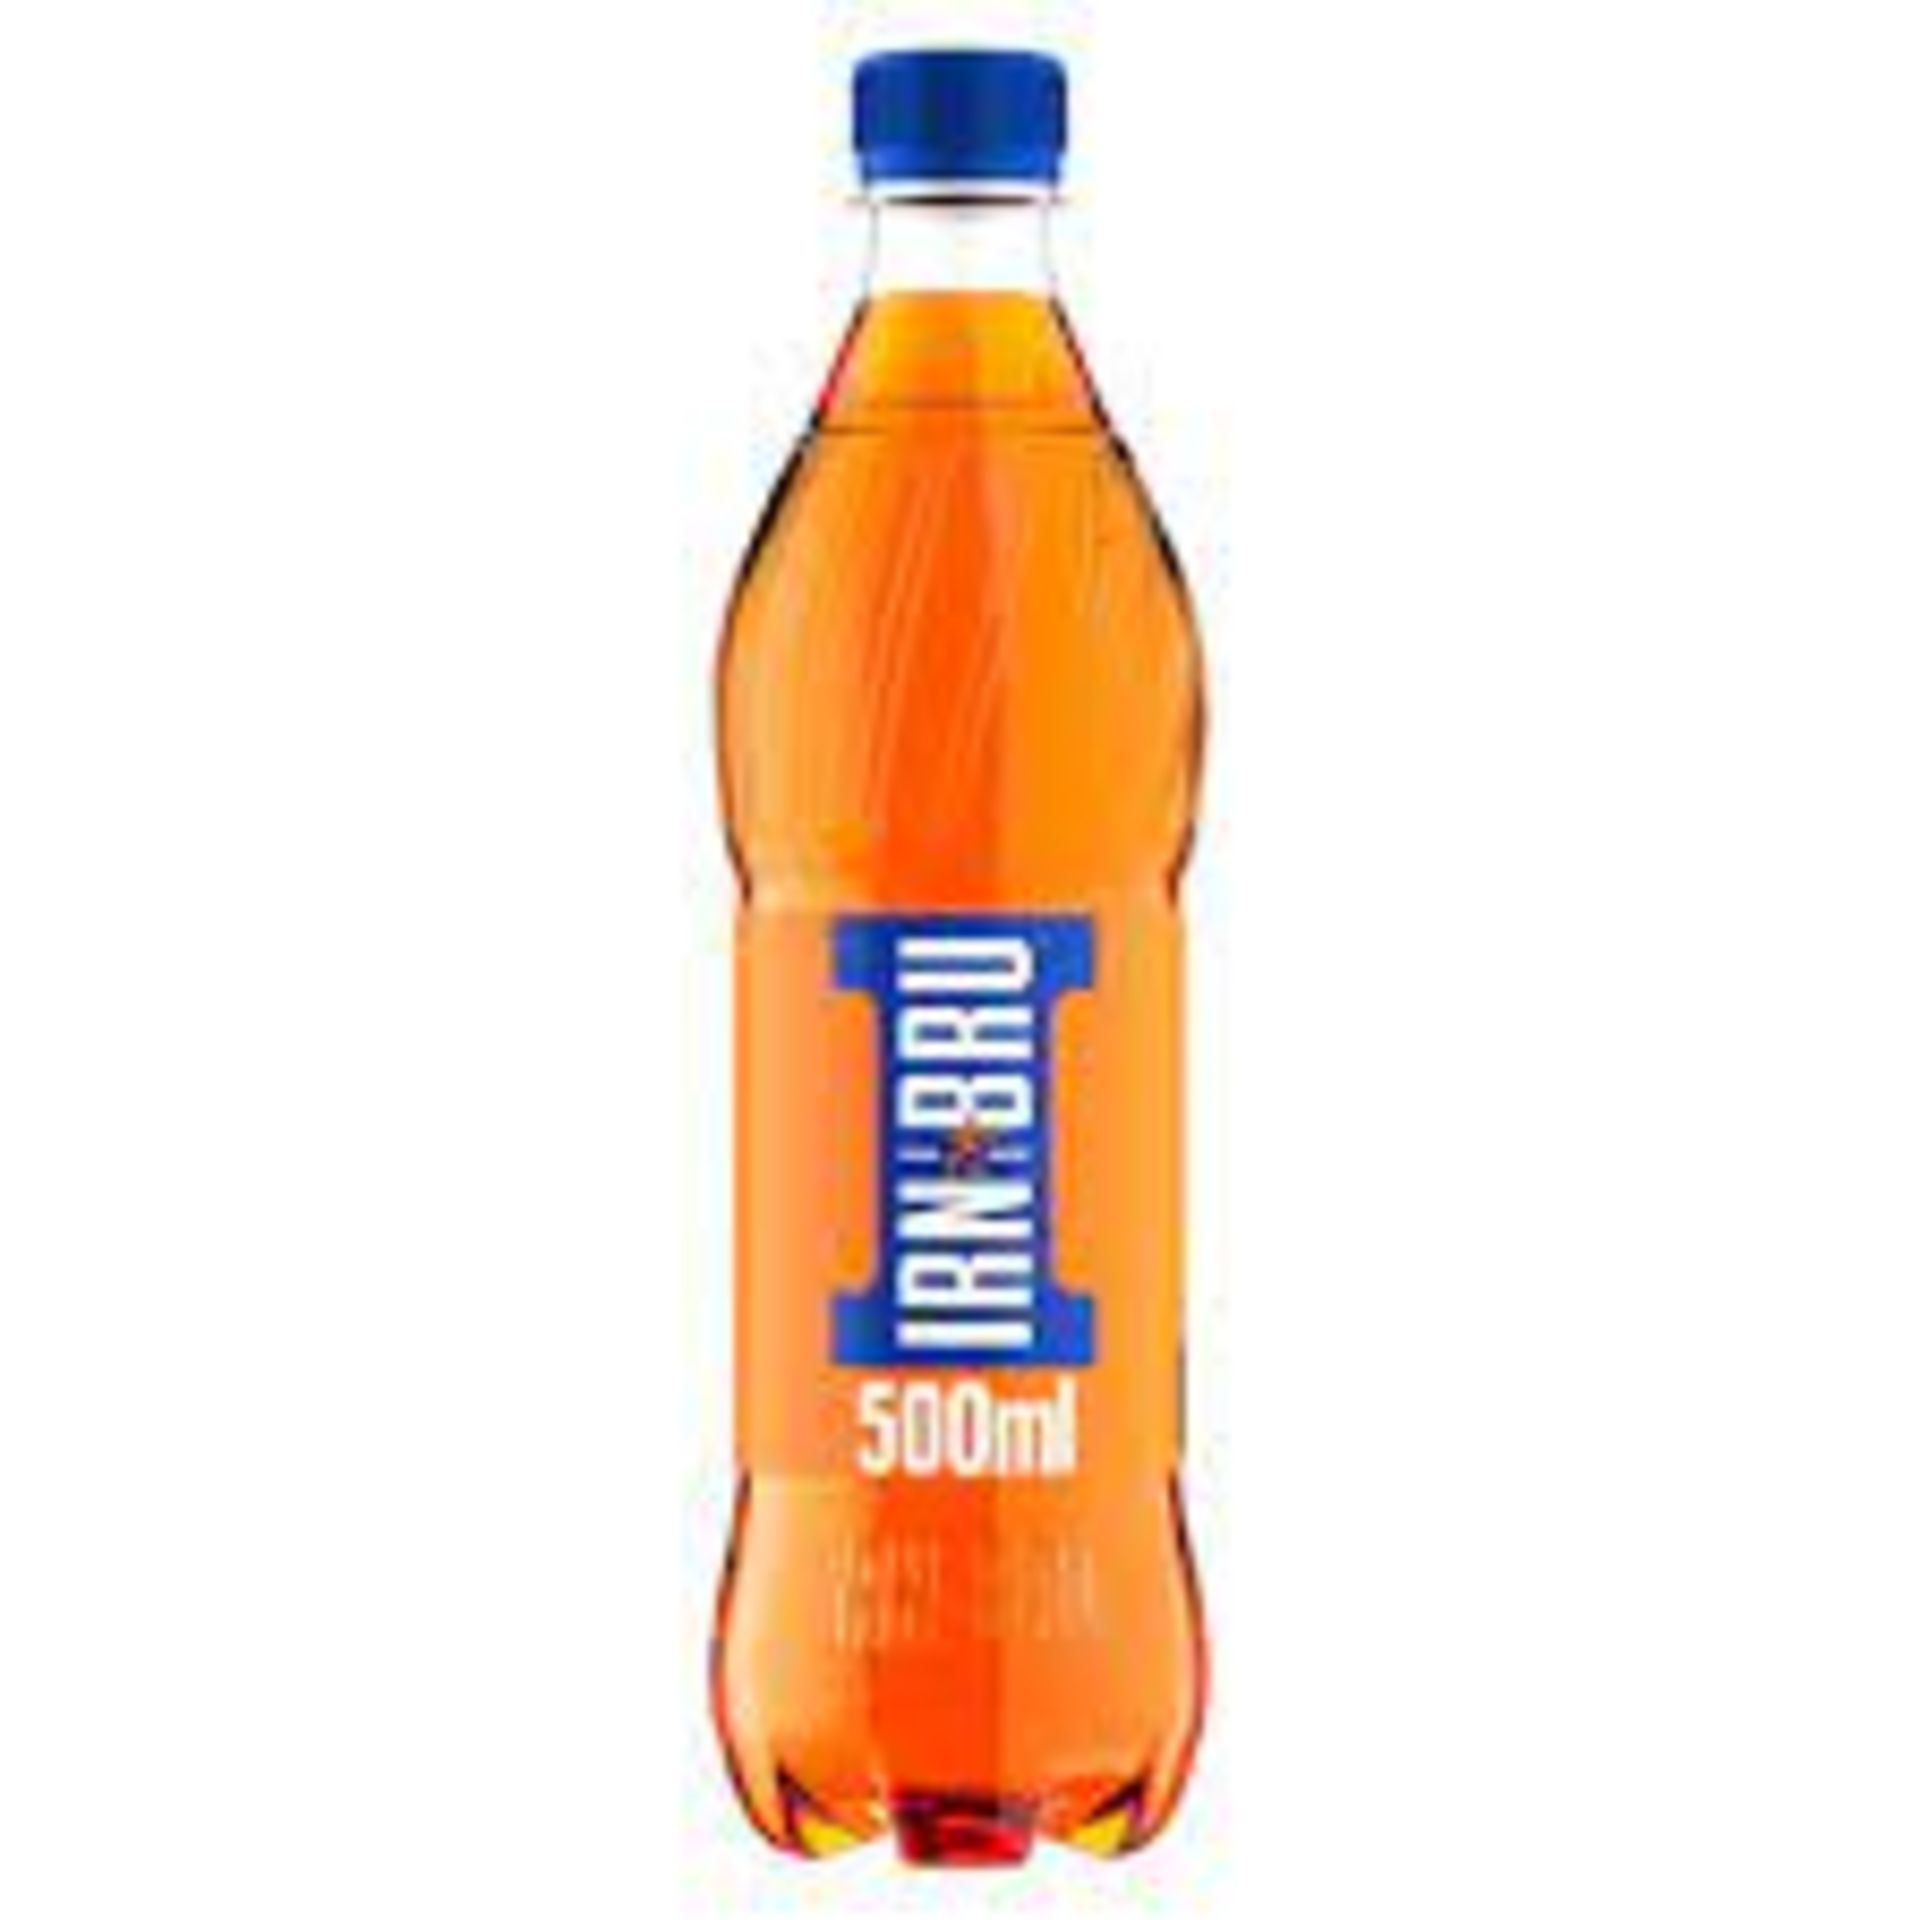 RRP £1,500- Assorted Groceries And Drinks Such As Irn Bru Energy, Kallo Crackers And Moreand More